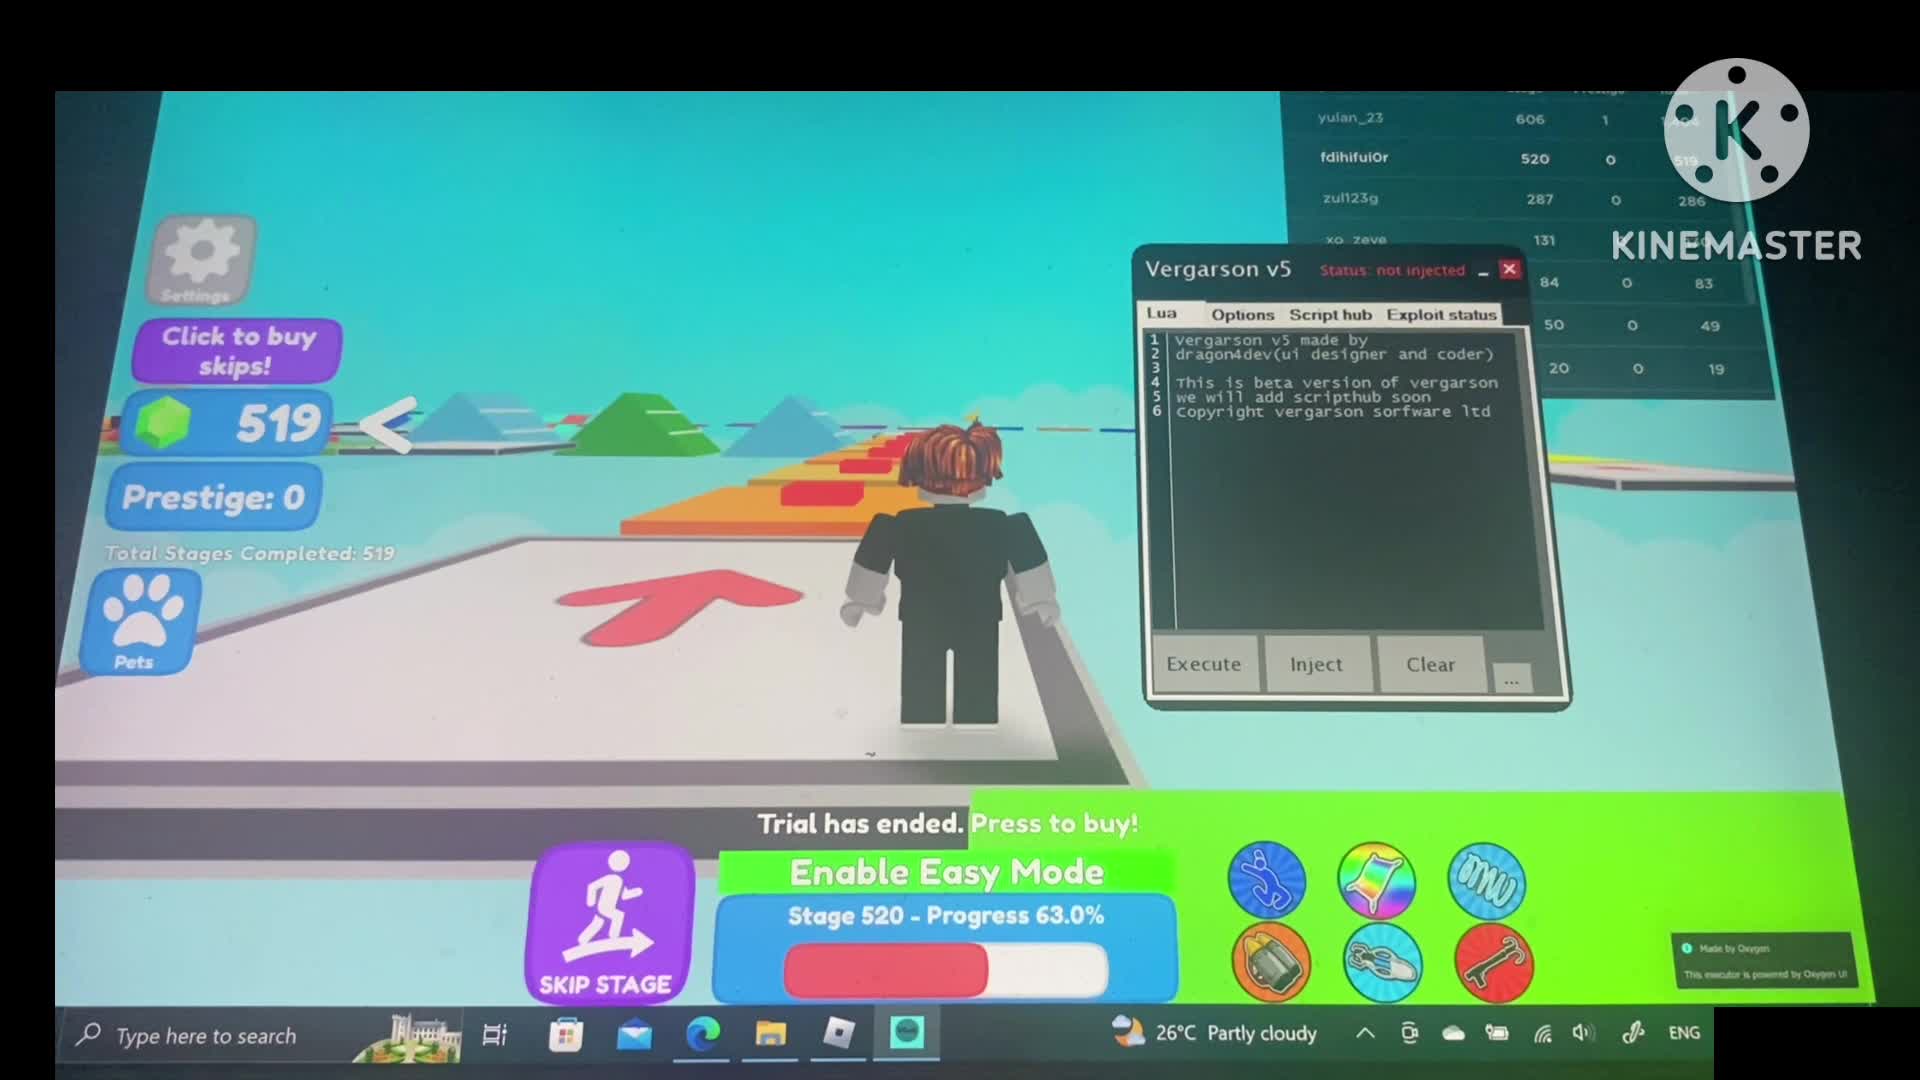 Roblox Executor Patched, Latest Bypass Byfron